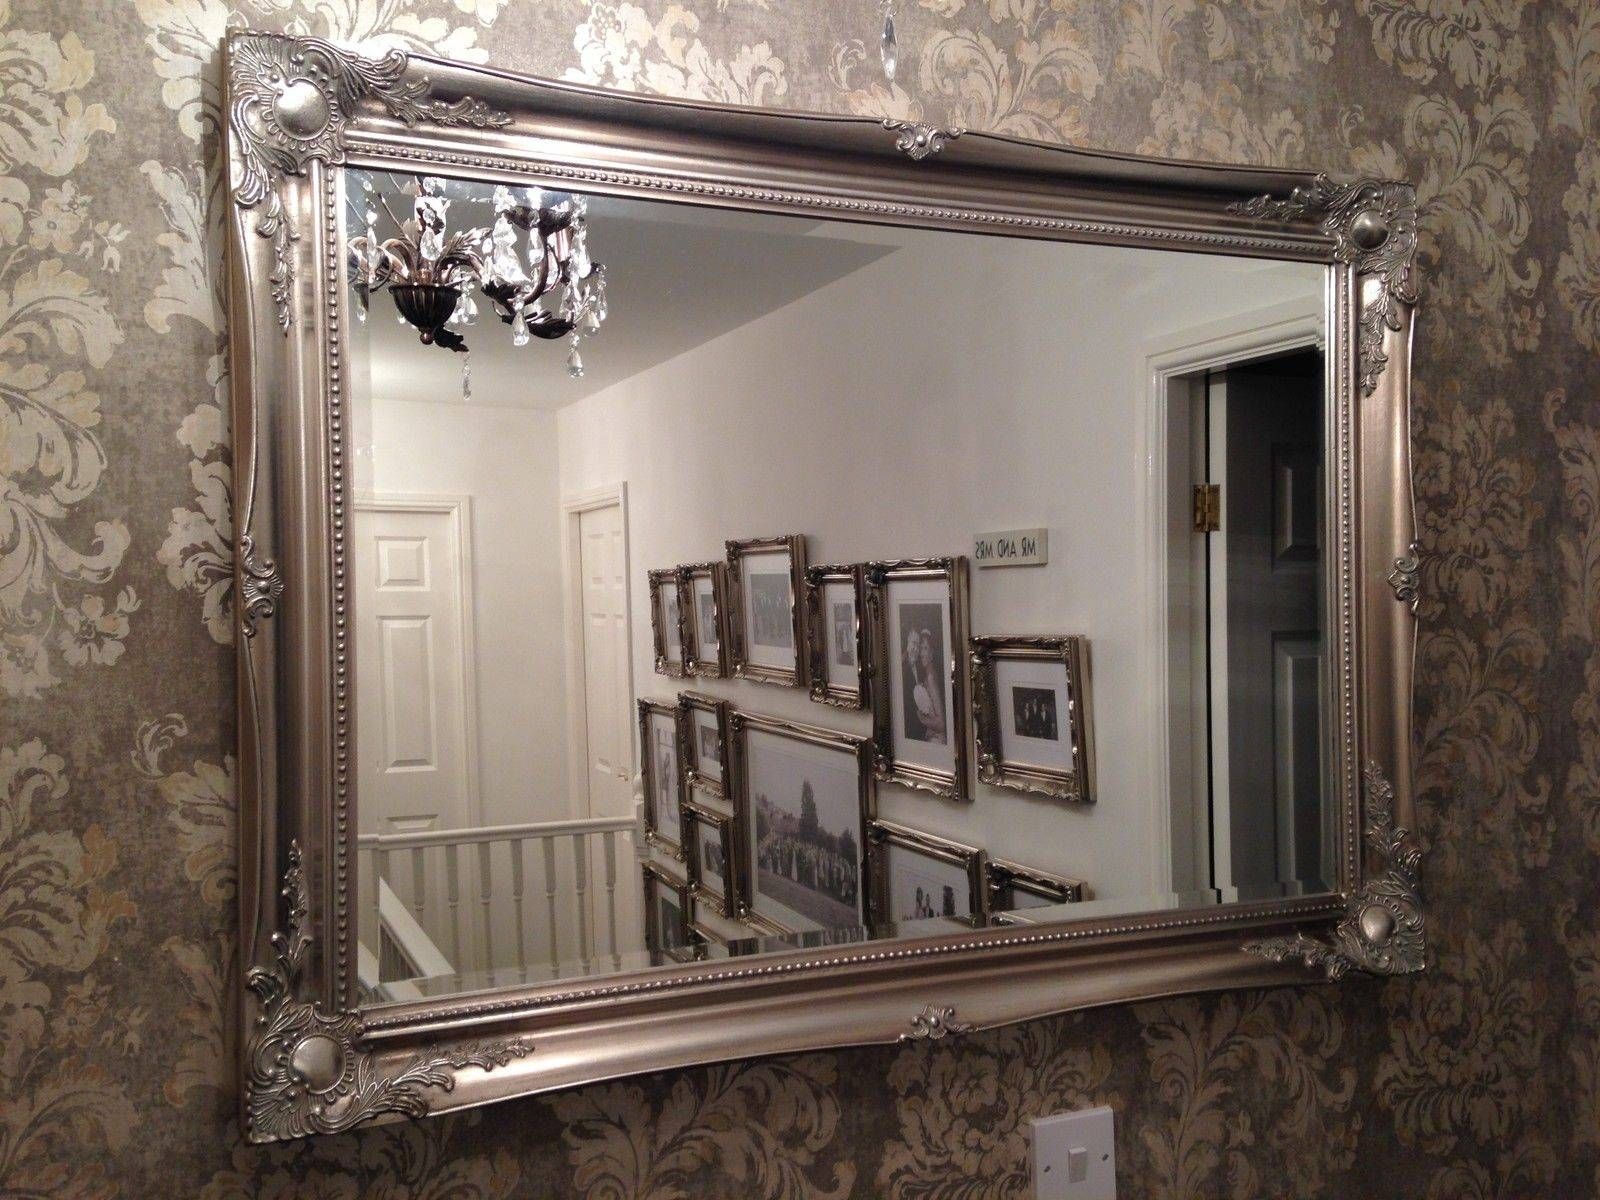 Large Antique Wall Mirror Ornate Frame Antique Ornate Wall Mirrors In Large Venetian Mirrors (View 16 of 25)